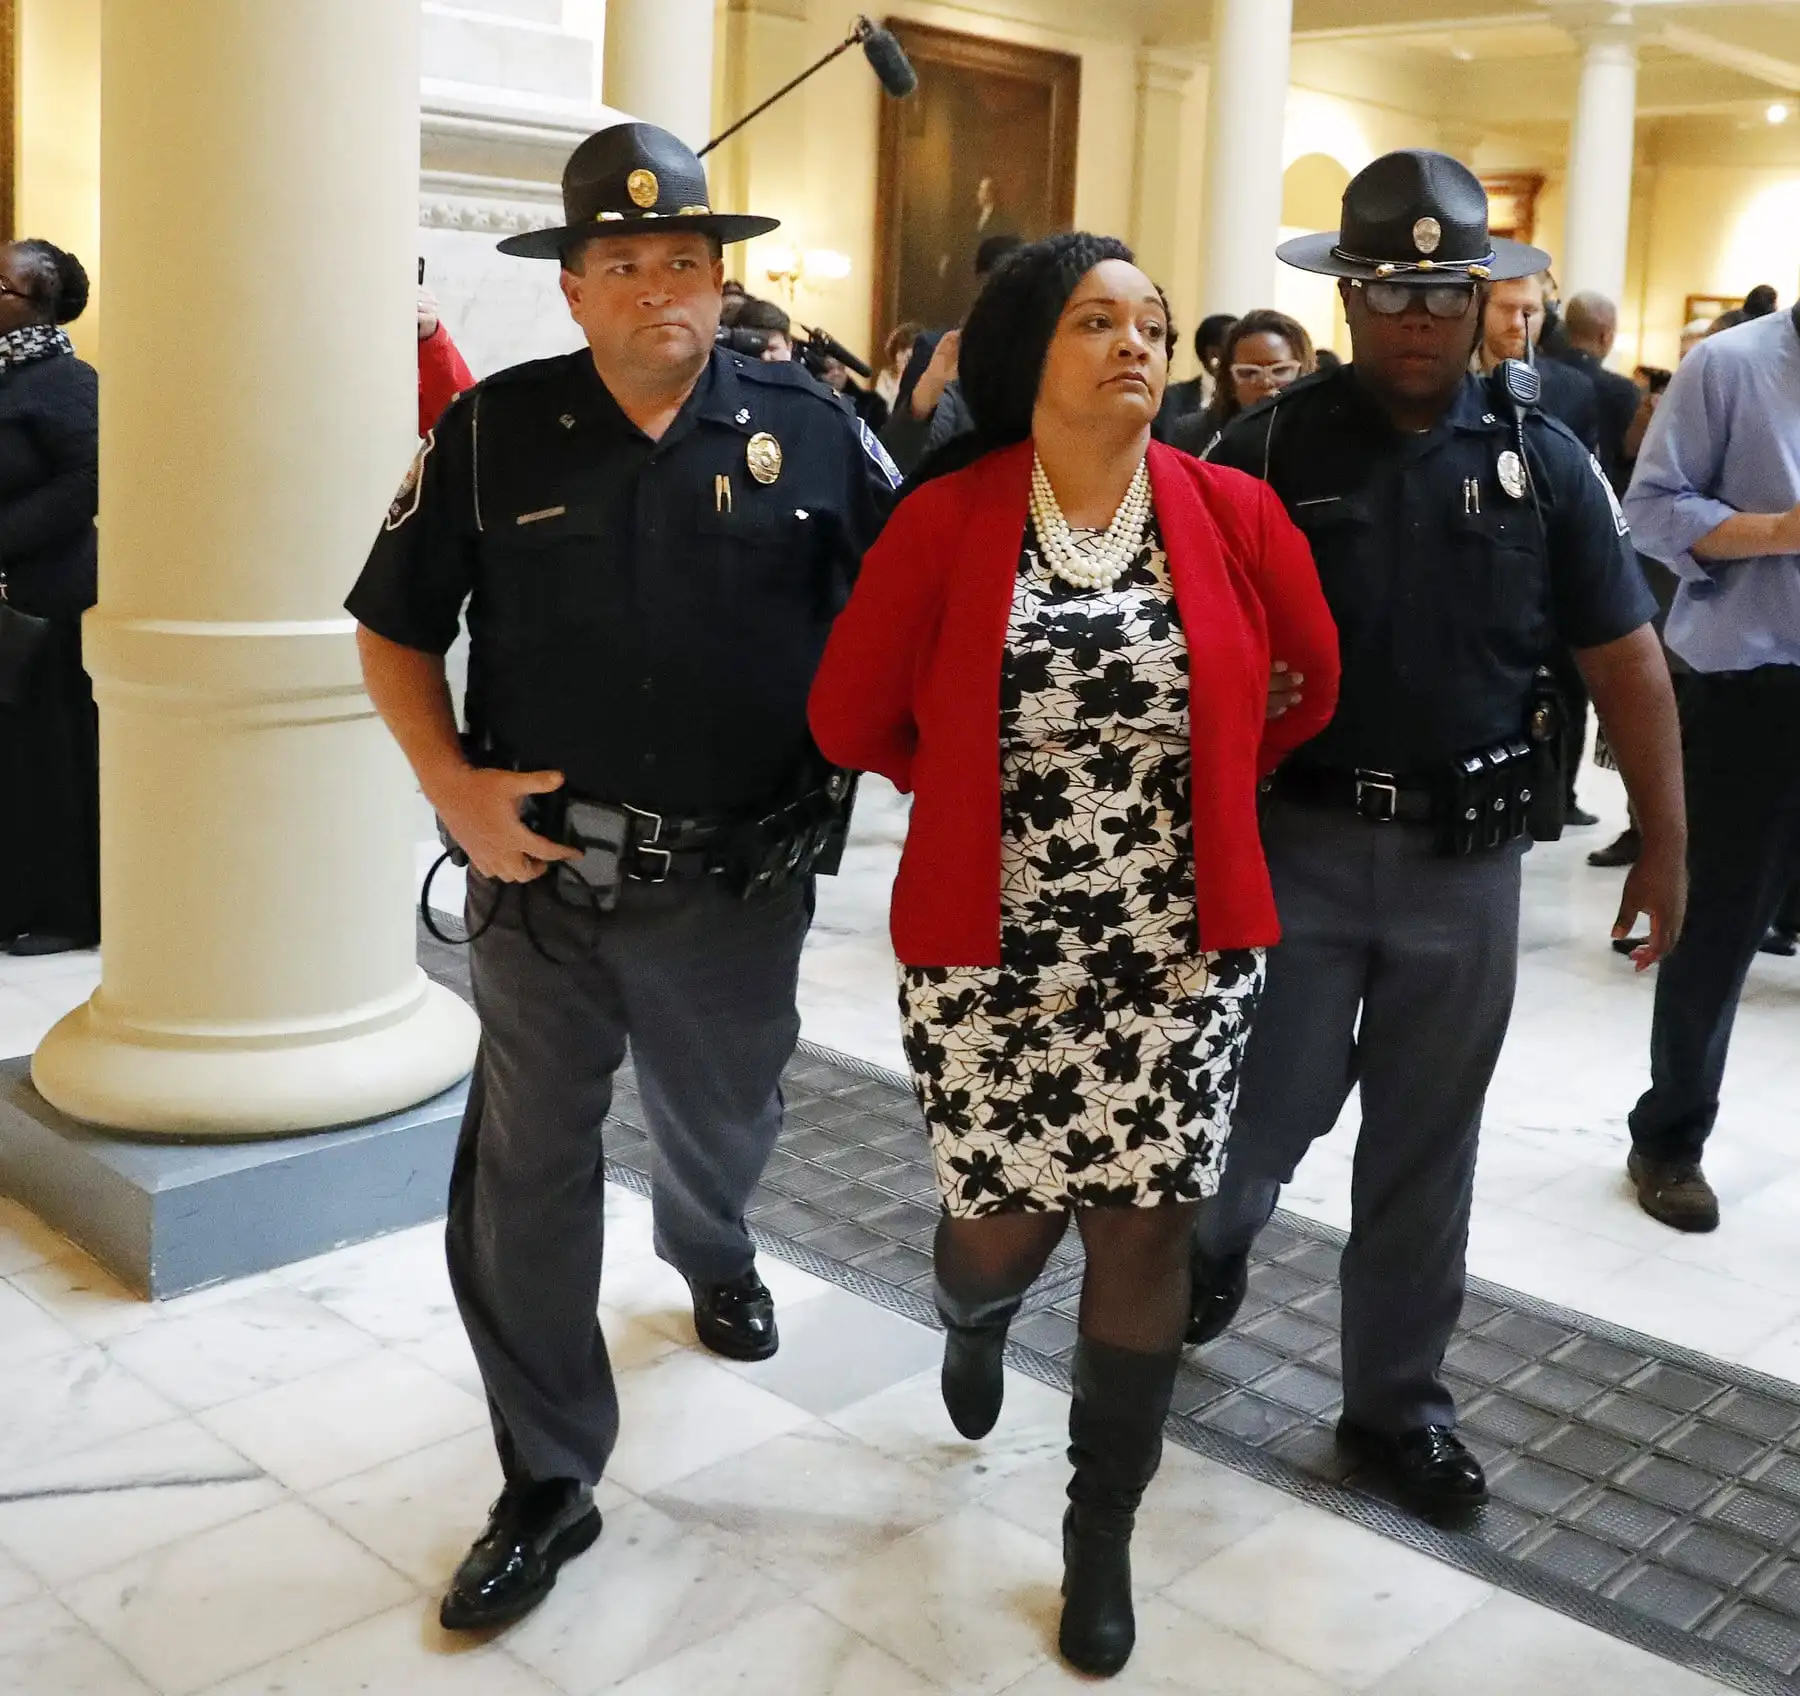 Sen. Nikema Williams (D-Atlanta) is arrested by capitol police during a protest over election ballot counts.